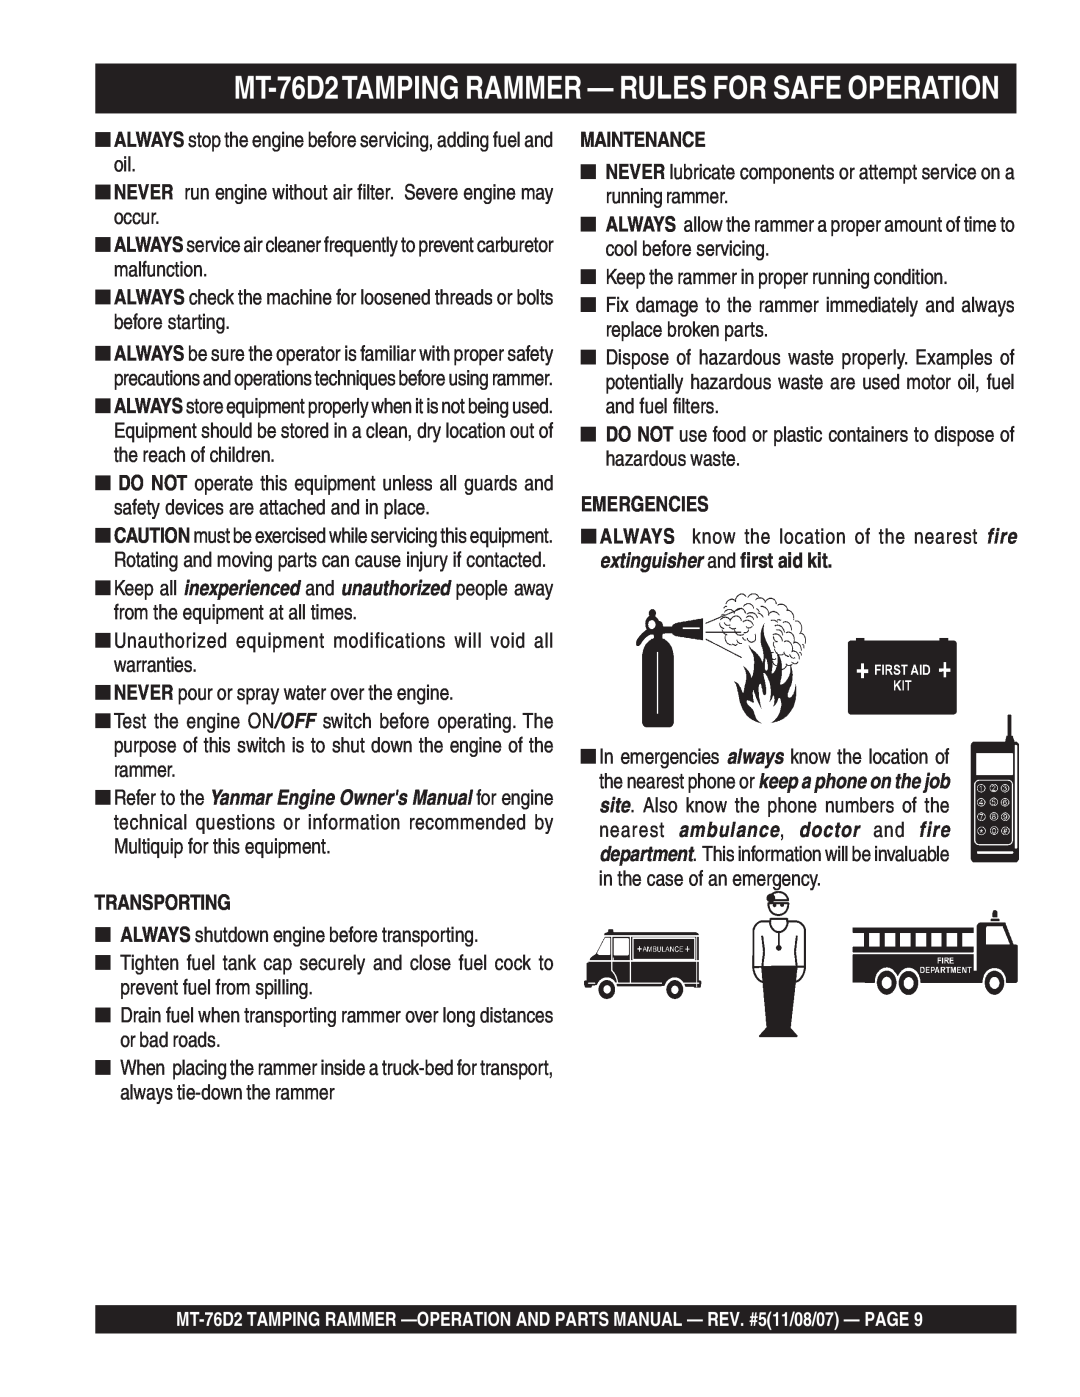 Multiquip manual MT-76D2TAMPING RAMMER - RULES FOR SAFE OPERATION, Transporting, Maintenance, Emergencies 